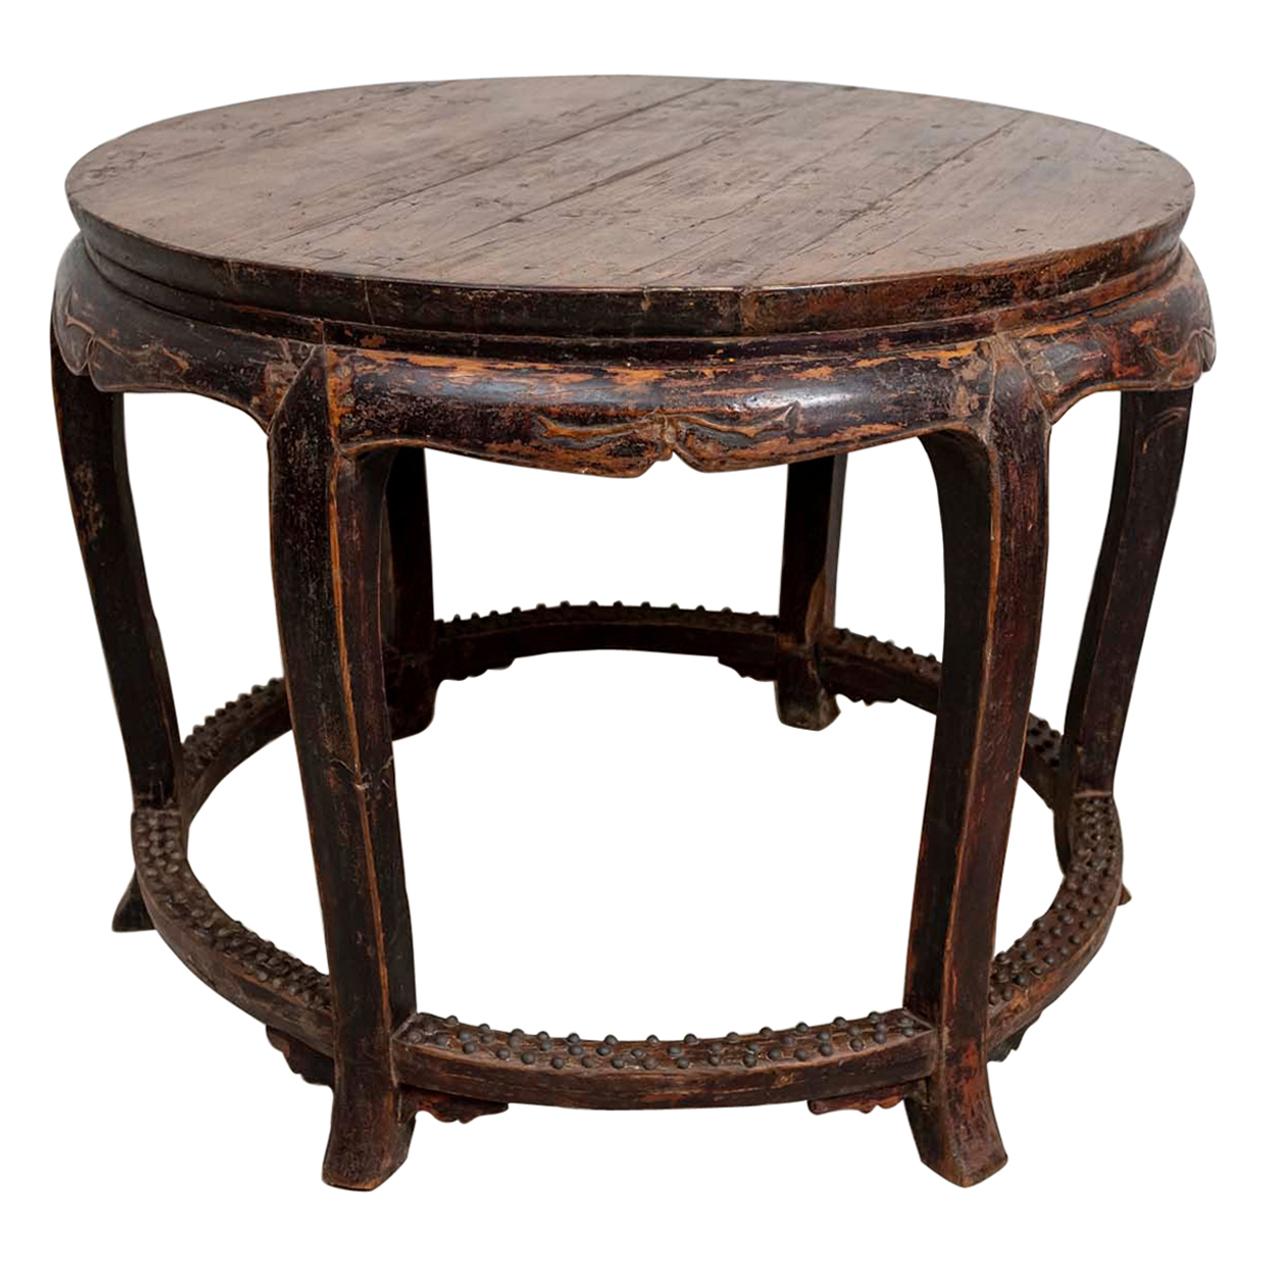 19th Century Chinese Qing Dynasty Round Hardwood Centre Table